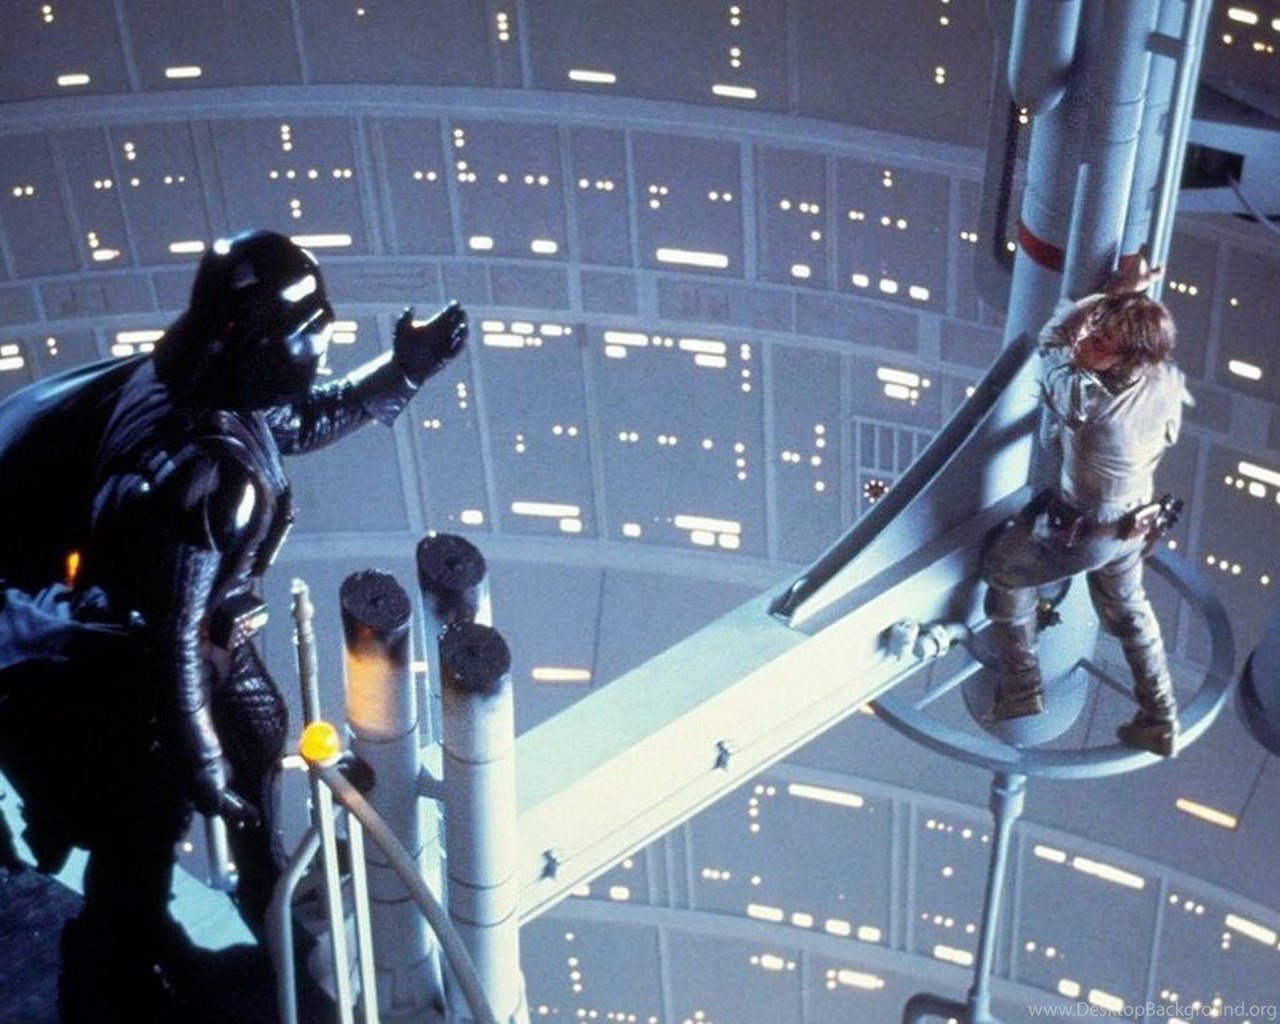 Star Wars: Episode V - The Empire Strikes Back Wallpapers